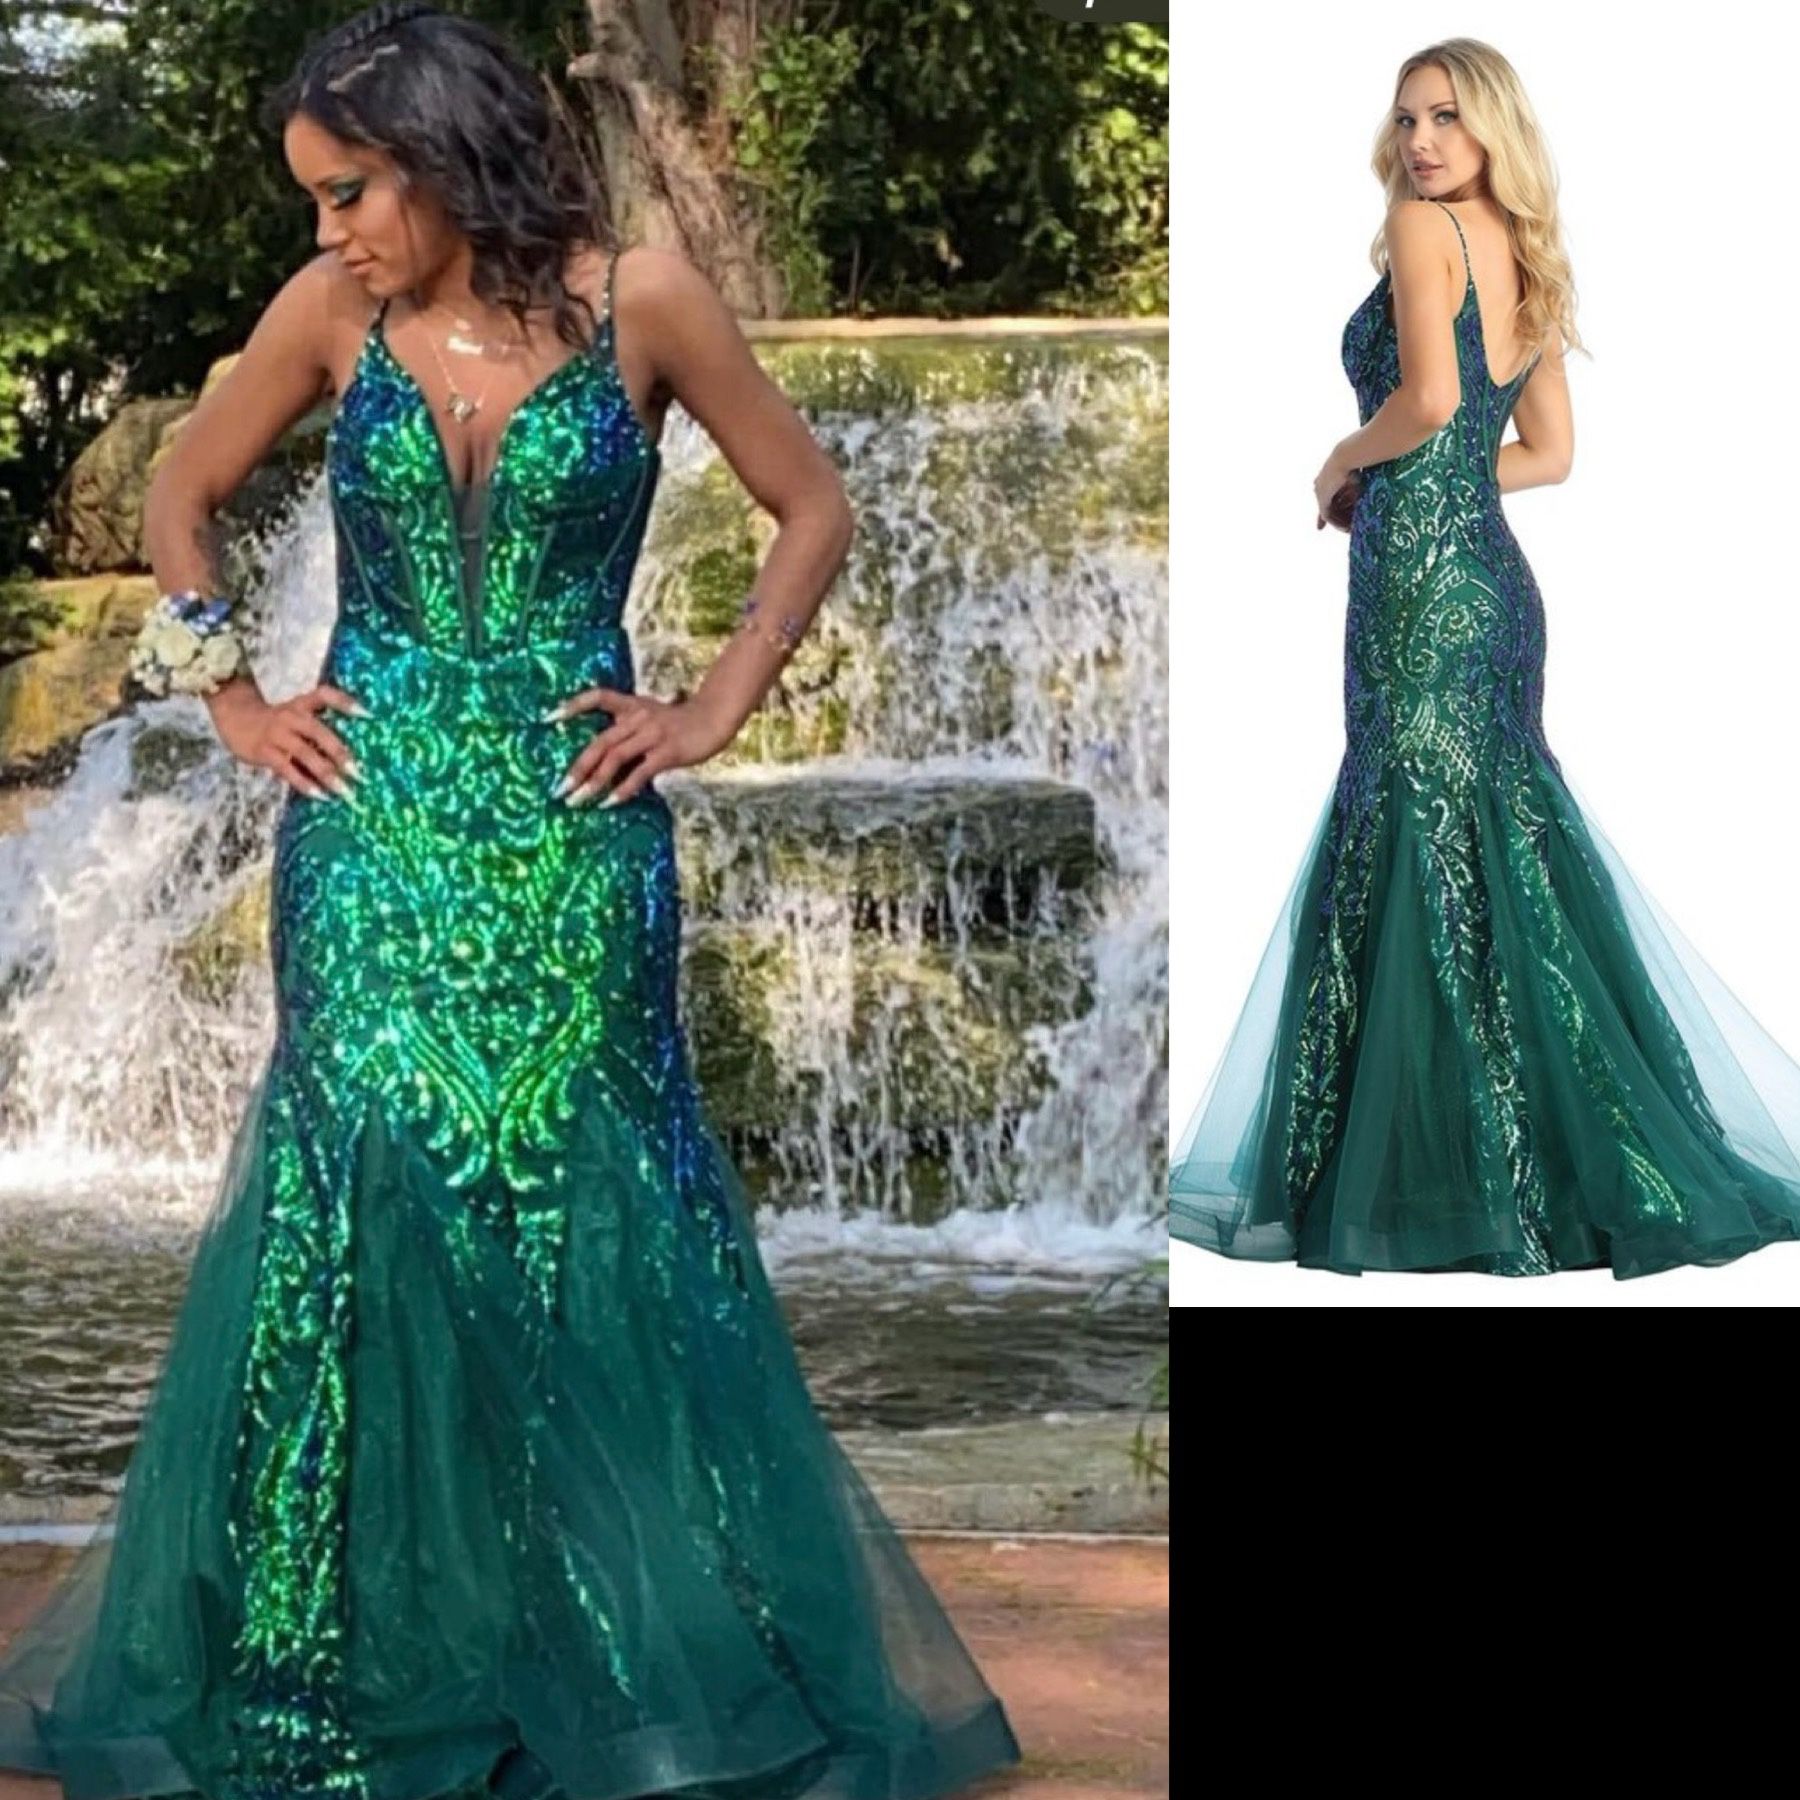 New With Tags Emerald Green Sequin Mermaid Formal Dress & Prom Dress $235